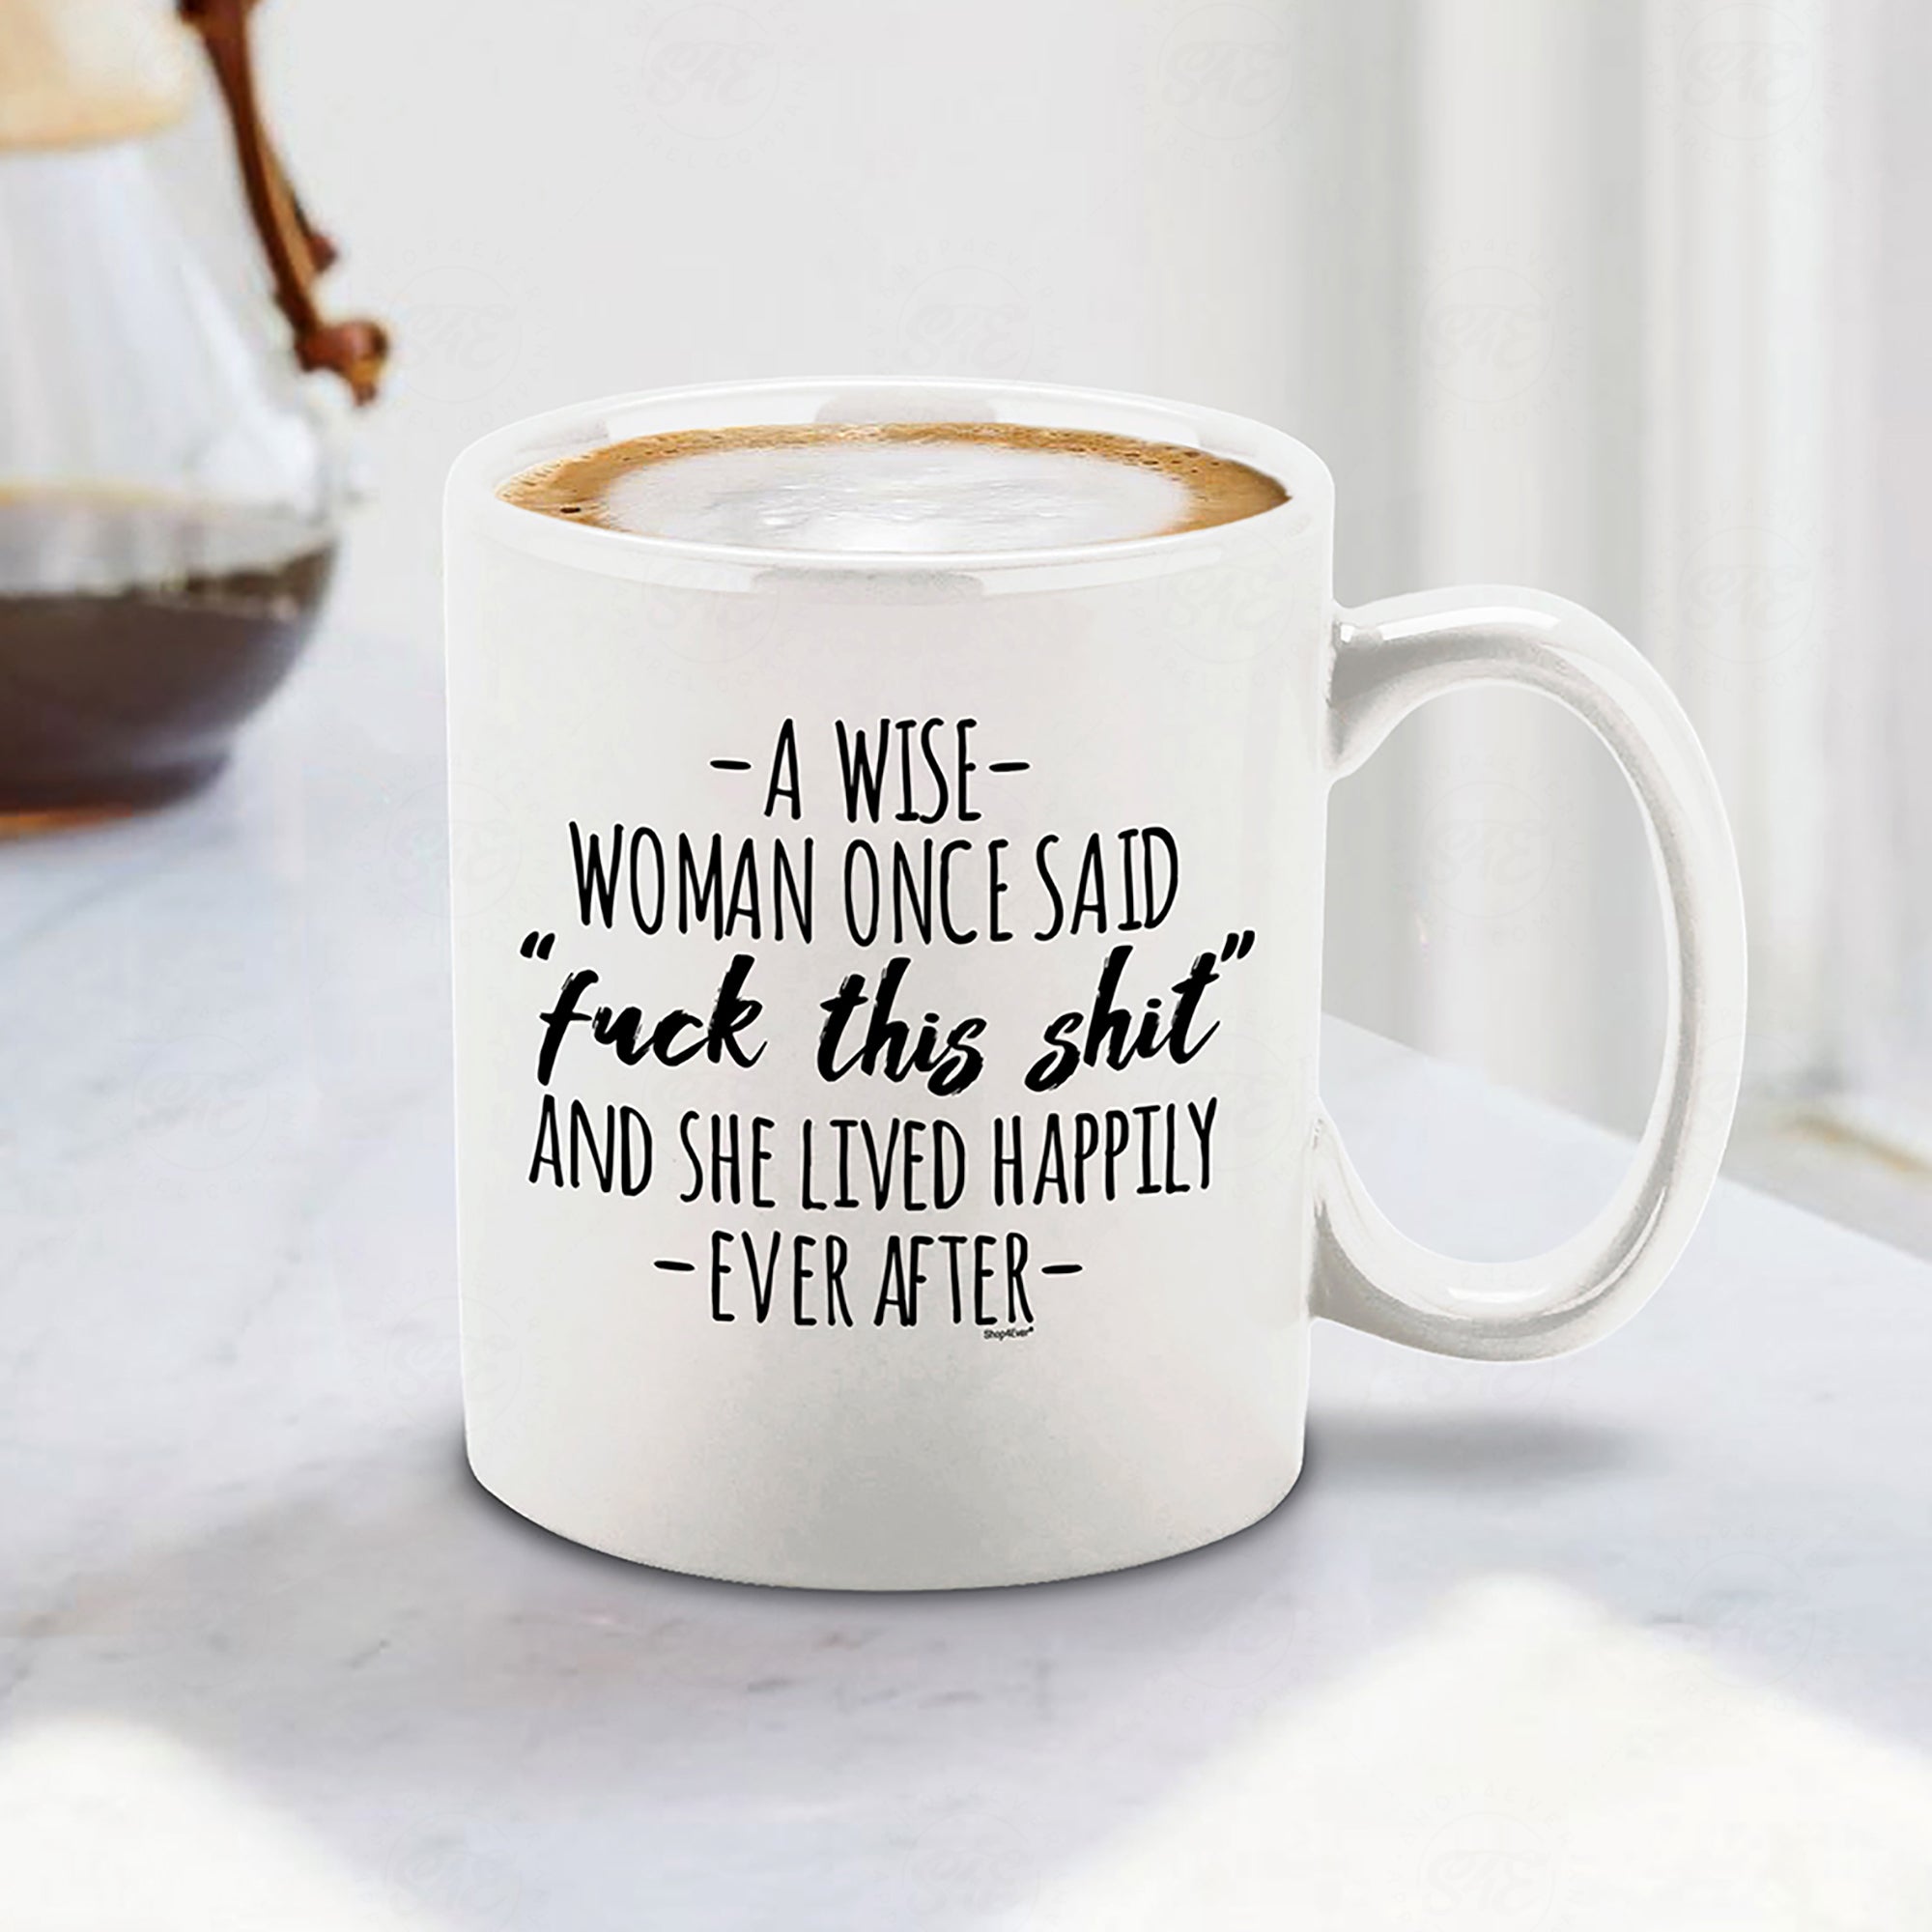 Funny Divorce Breakup Retirement Coffee Mug A Wise Woman Once Said And She Lived Happily Ever After Ceramic Coffee Mug Tea Cup